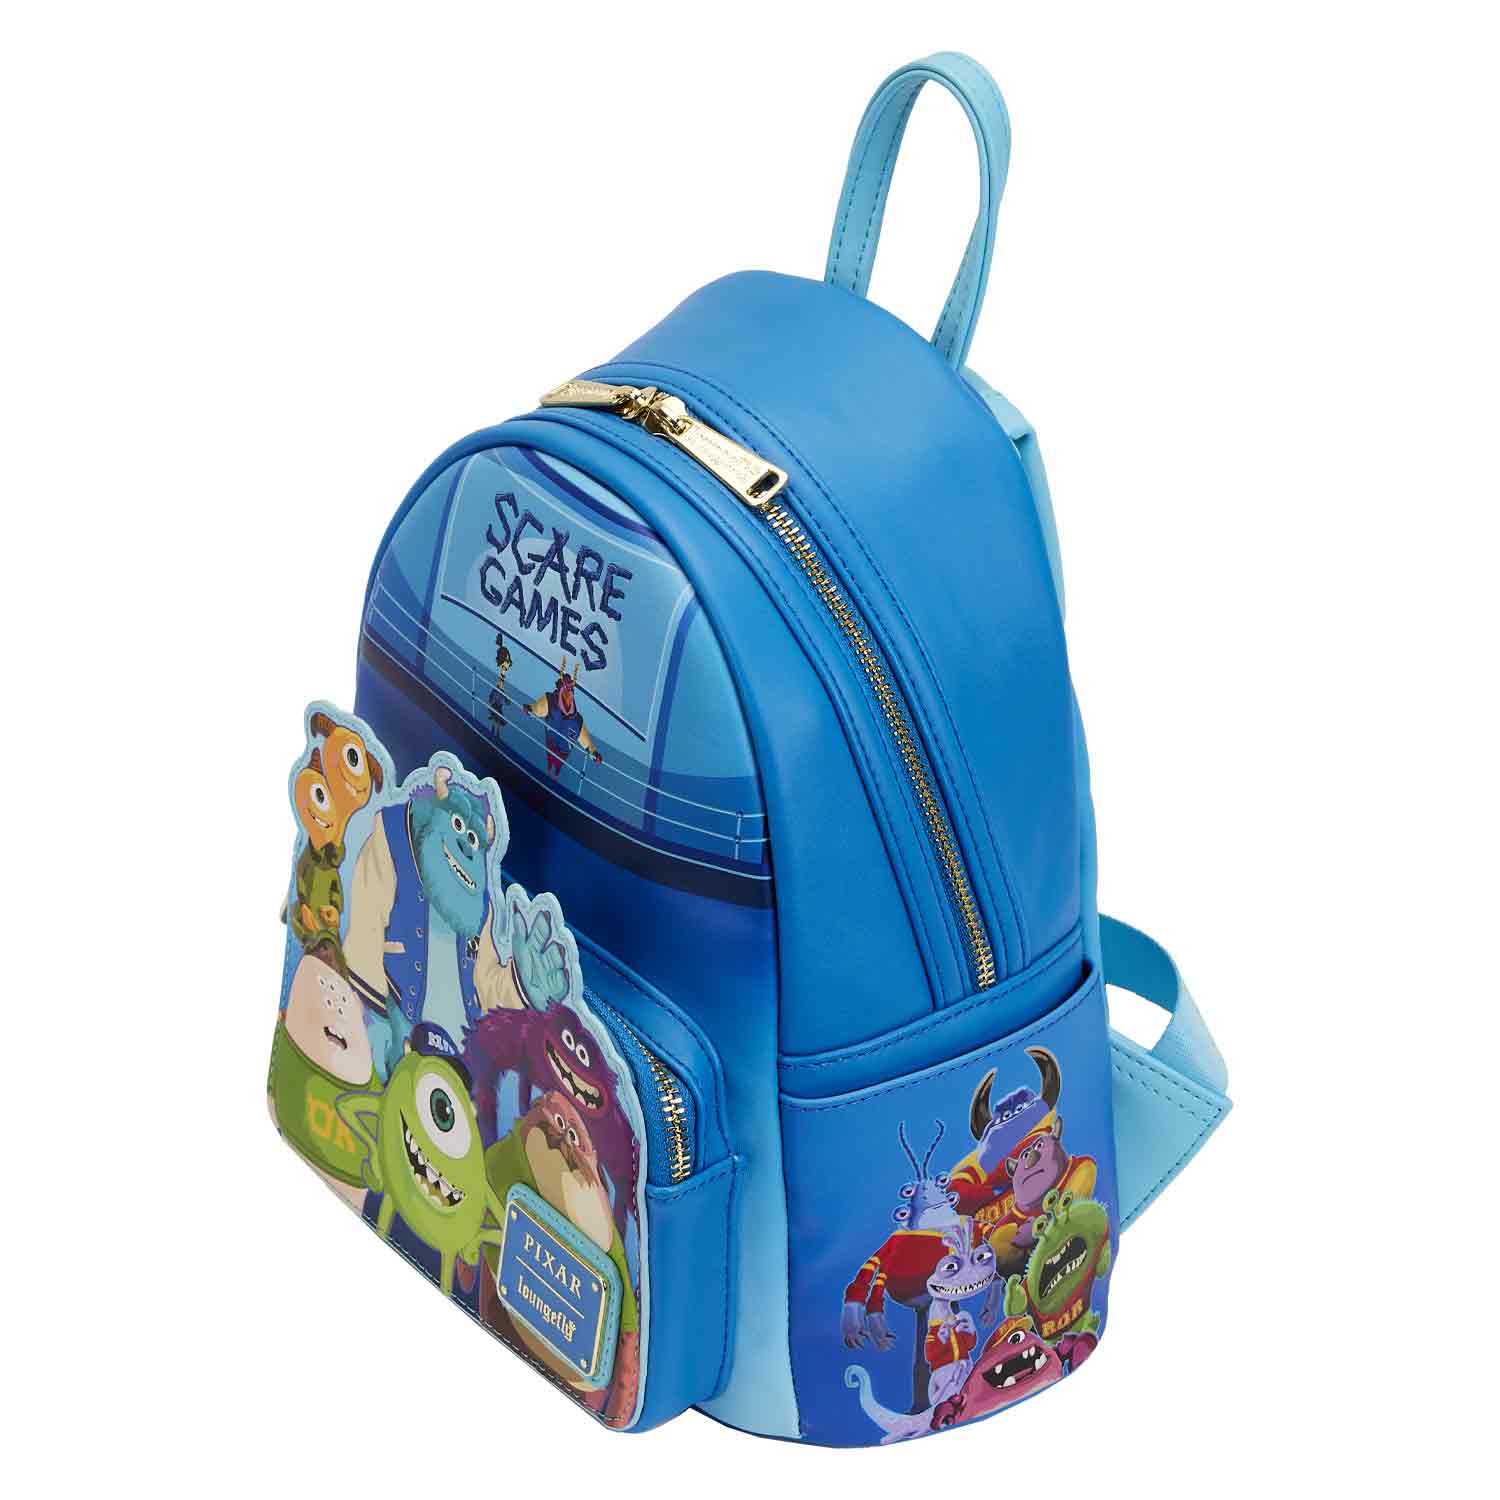 Loungefly x Disney Pixar Monsters University Scare Games Mini Backpack - GeekCore